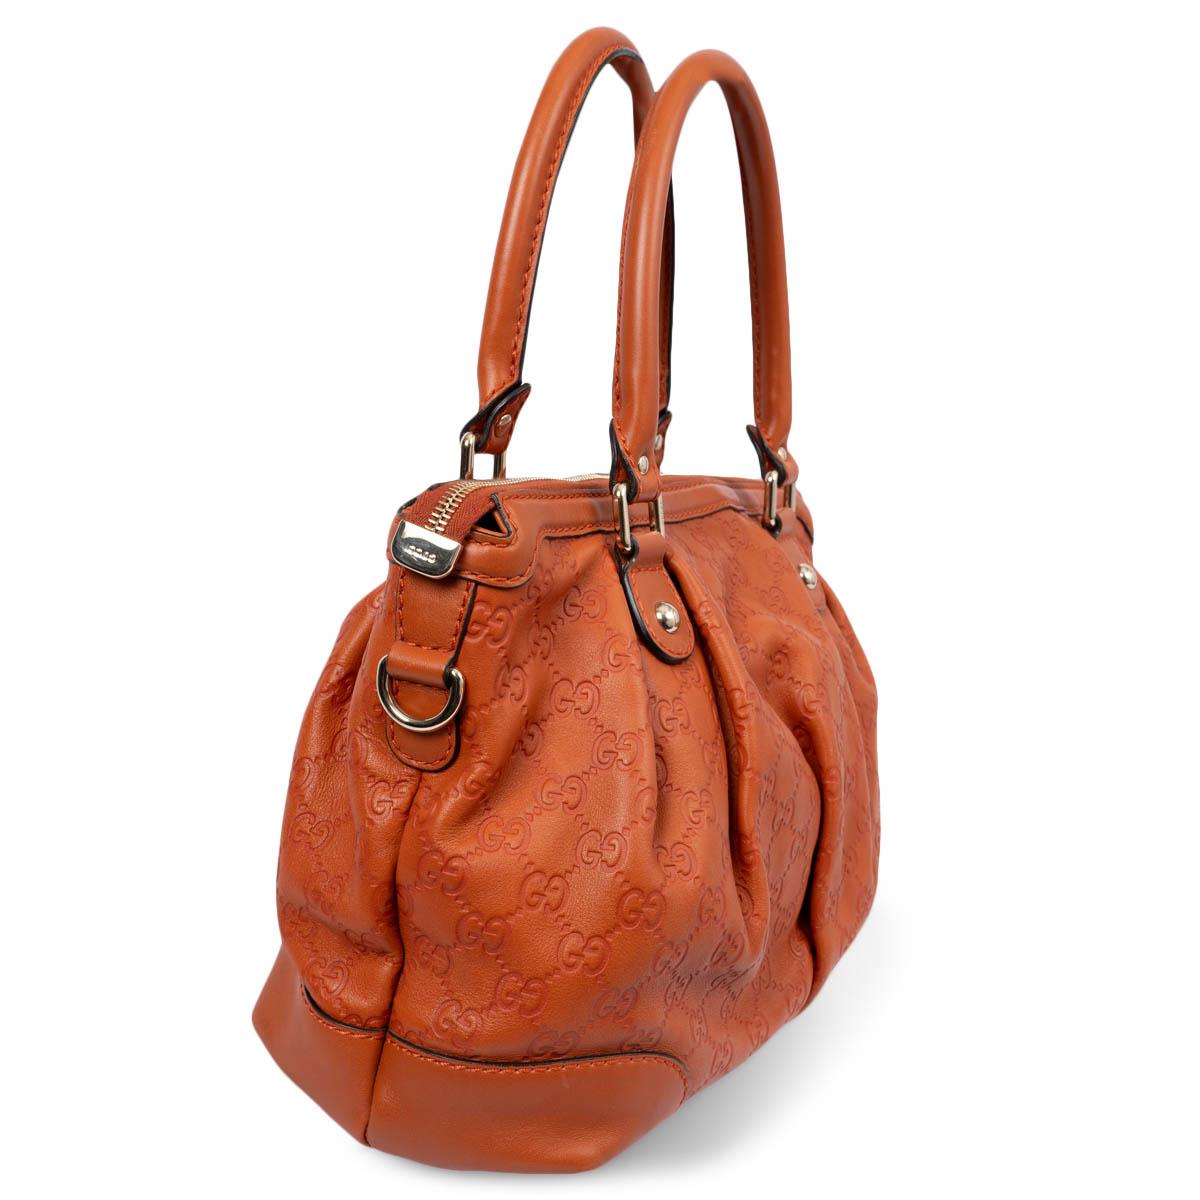 100% authentic Gucci Sukey Medium double handle bag in pumpkin orange Guccissima leather. Features gold-tone hardware, a detachable and adjustable shoulder strap and a ring with GG leather hangtag. Opens with a two-way zipper on top. Lined in beige